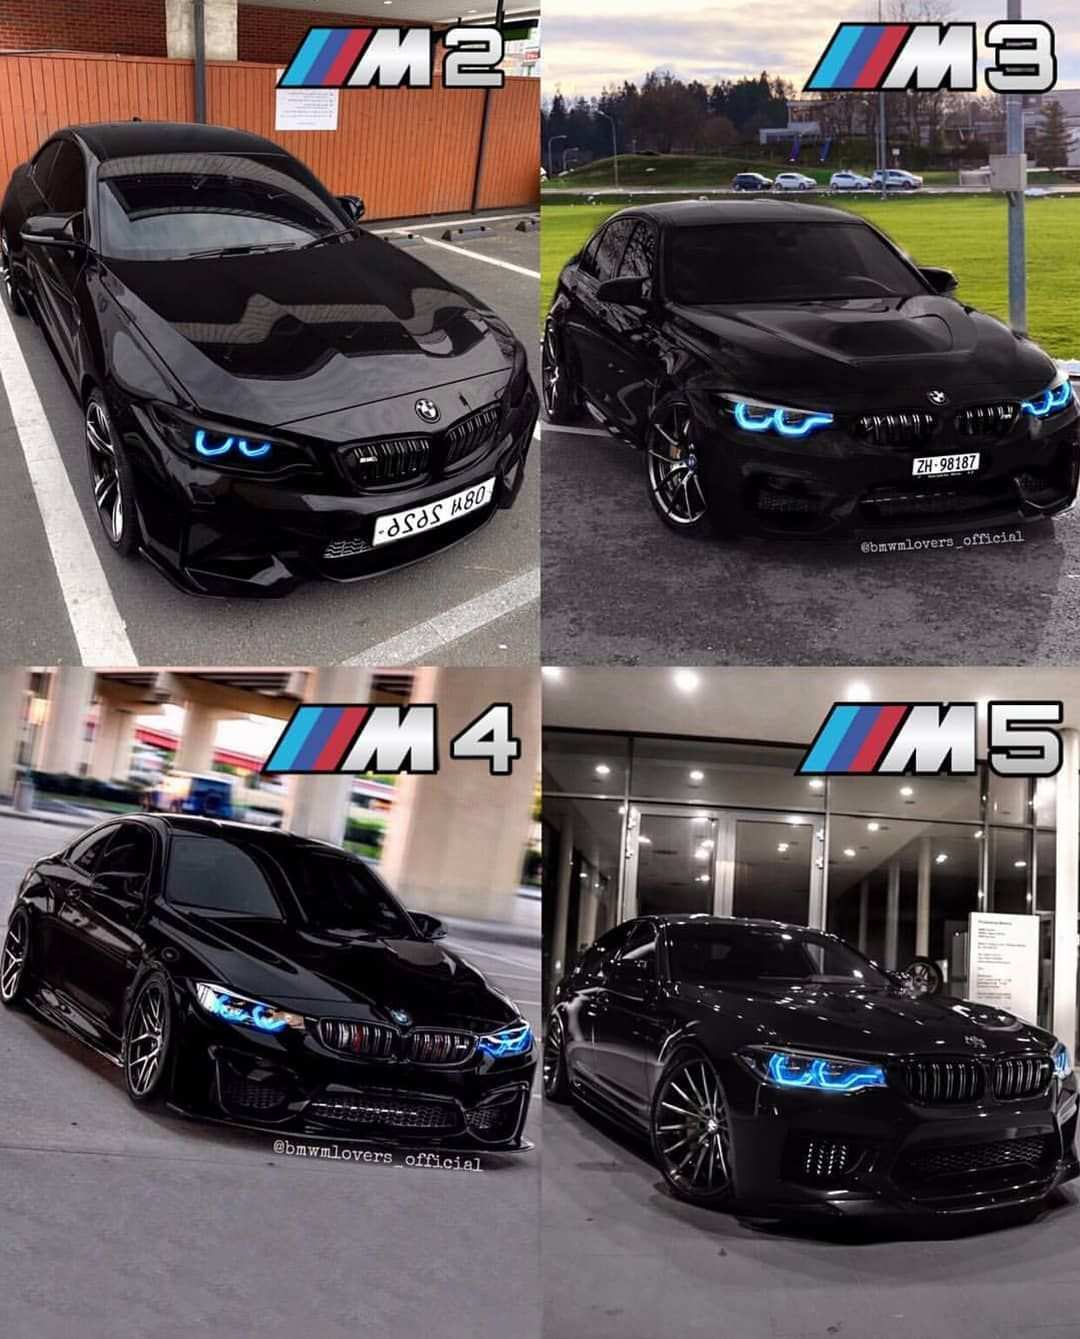 M Beasts With Images Bmw Sports Car Bmw Convertible Bmw